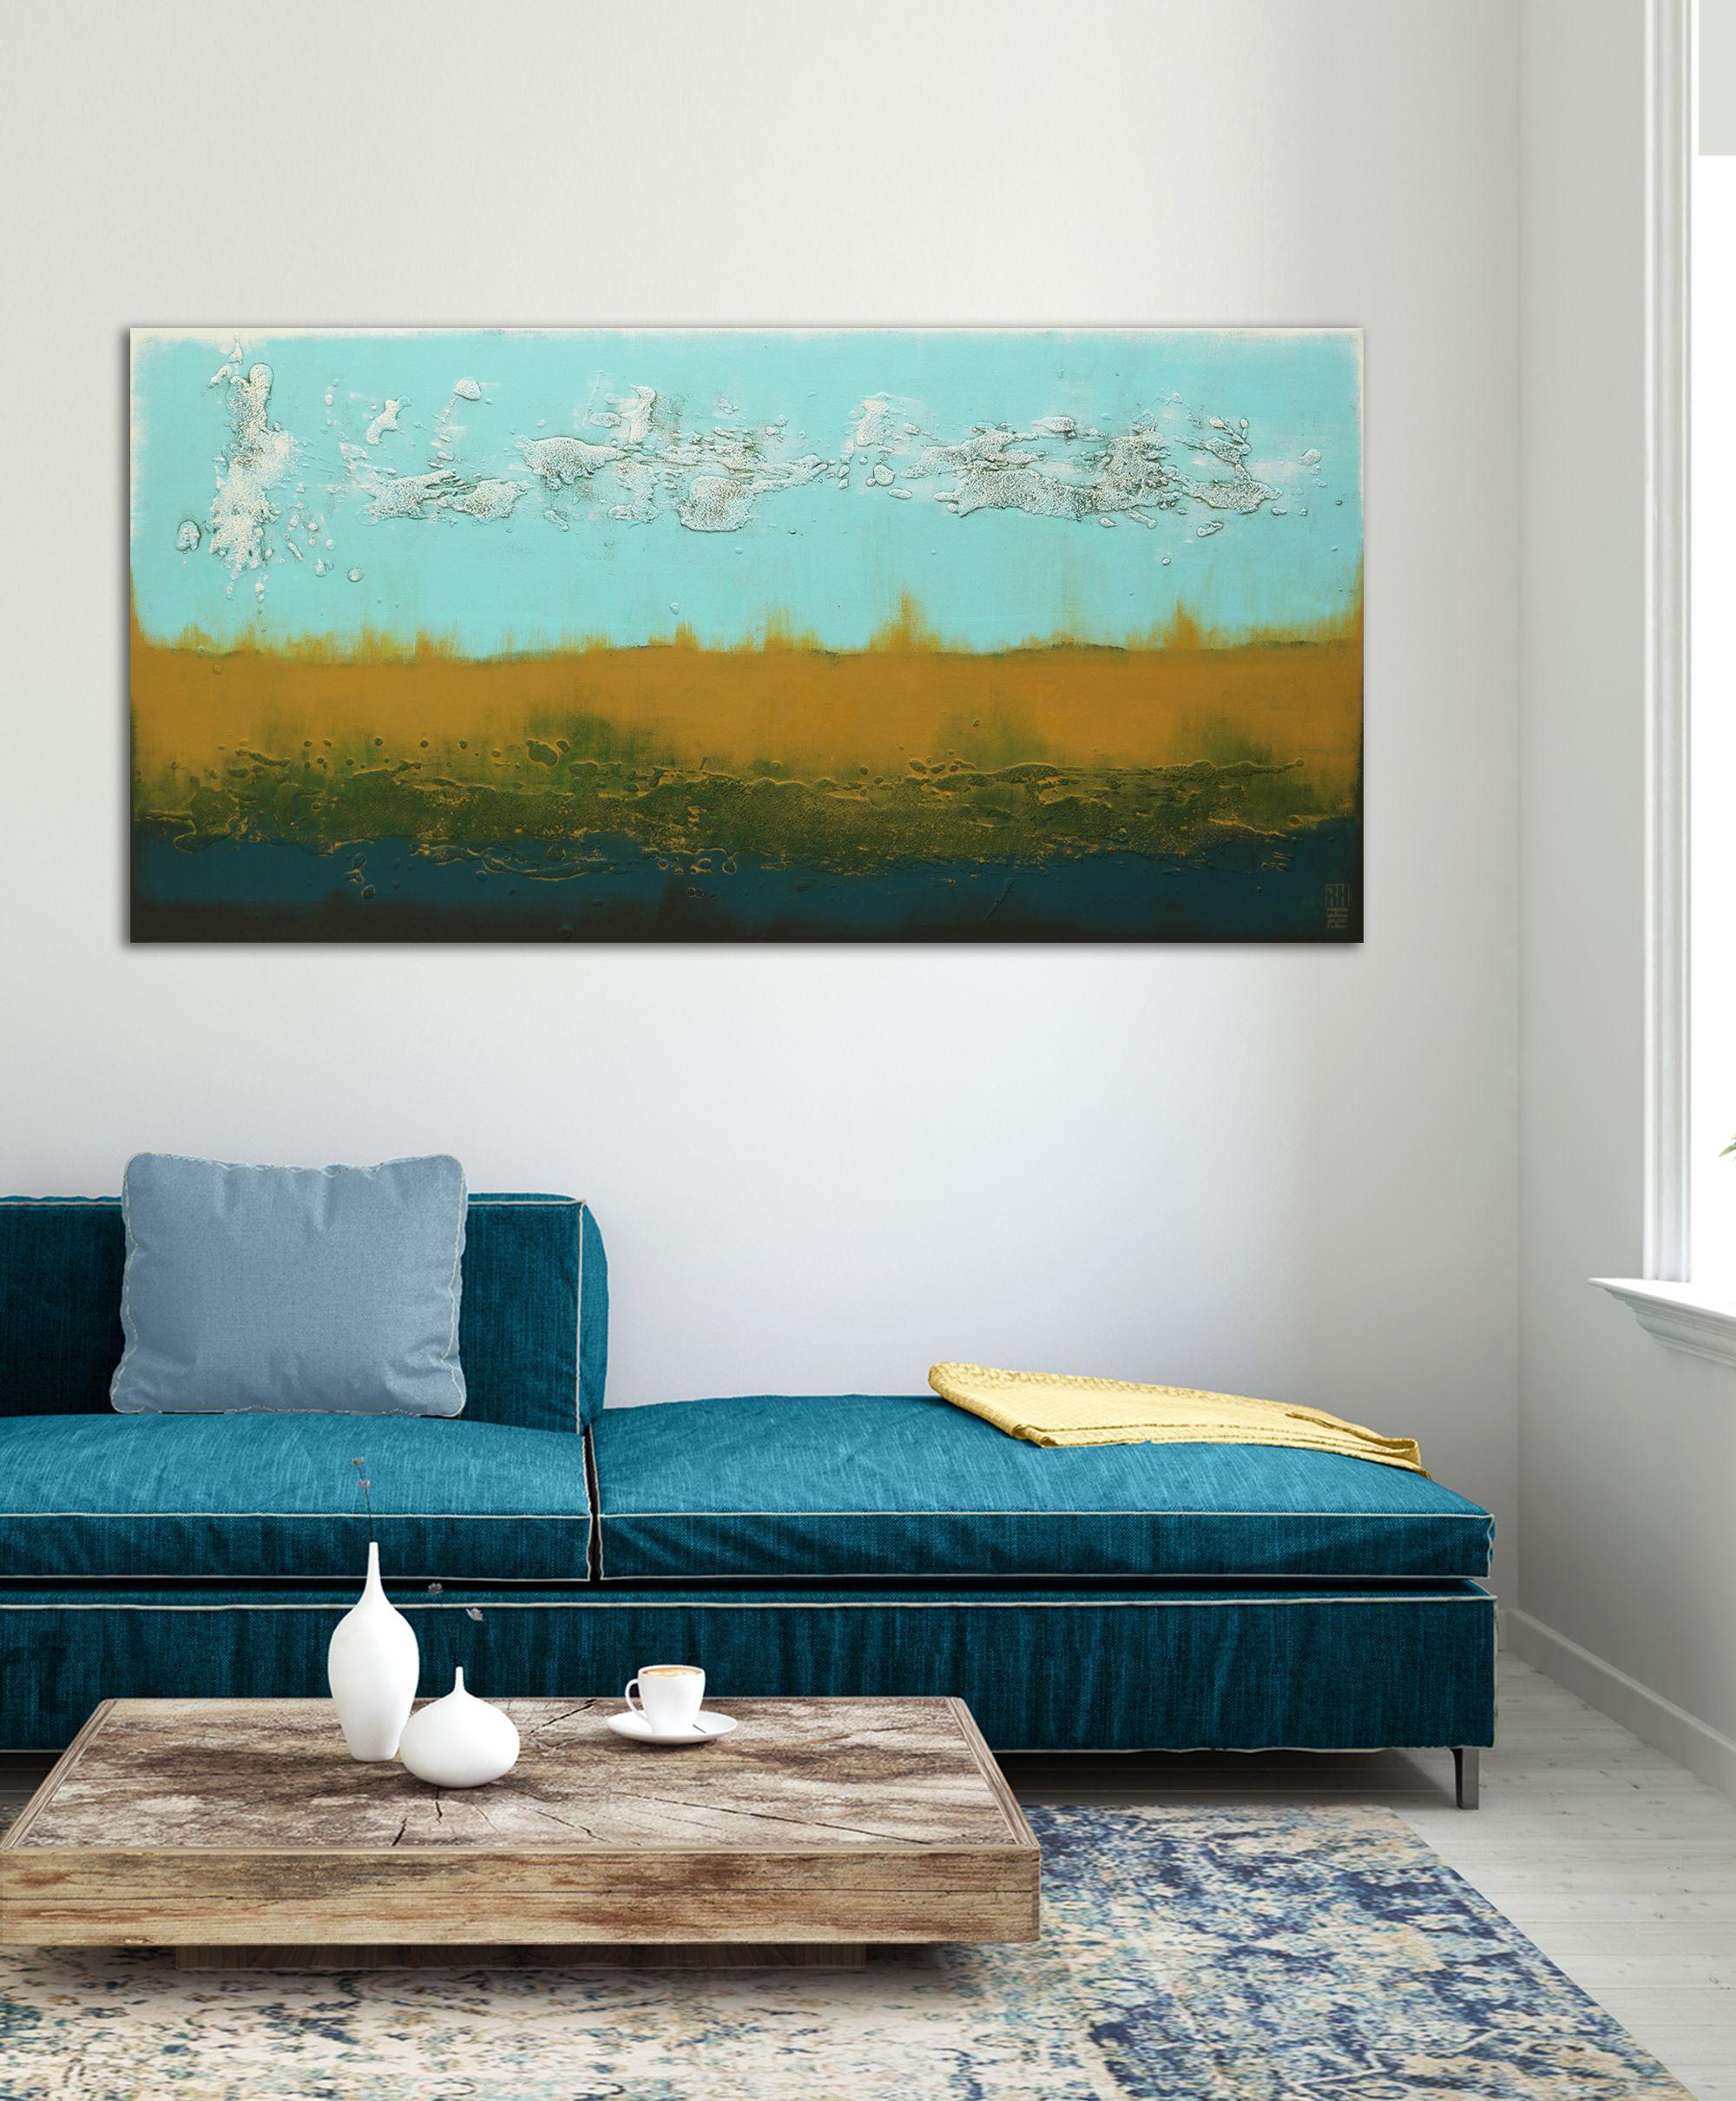 Acrylic Abstract Painting, Original artwork created by Ronald Hunter.    You will receive the artwork ready to hang on a wooden frame with a hook on the back.   